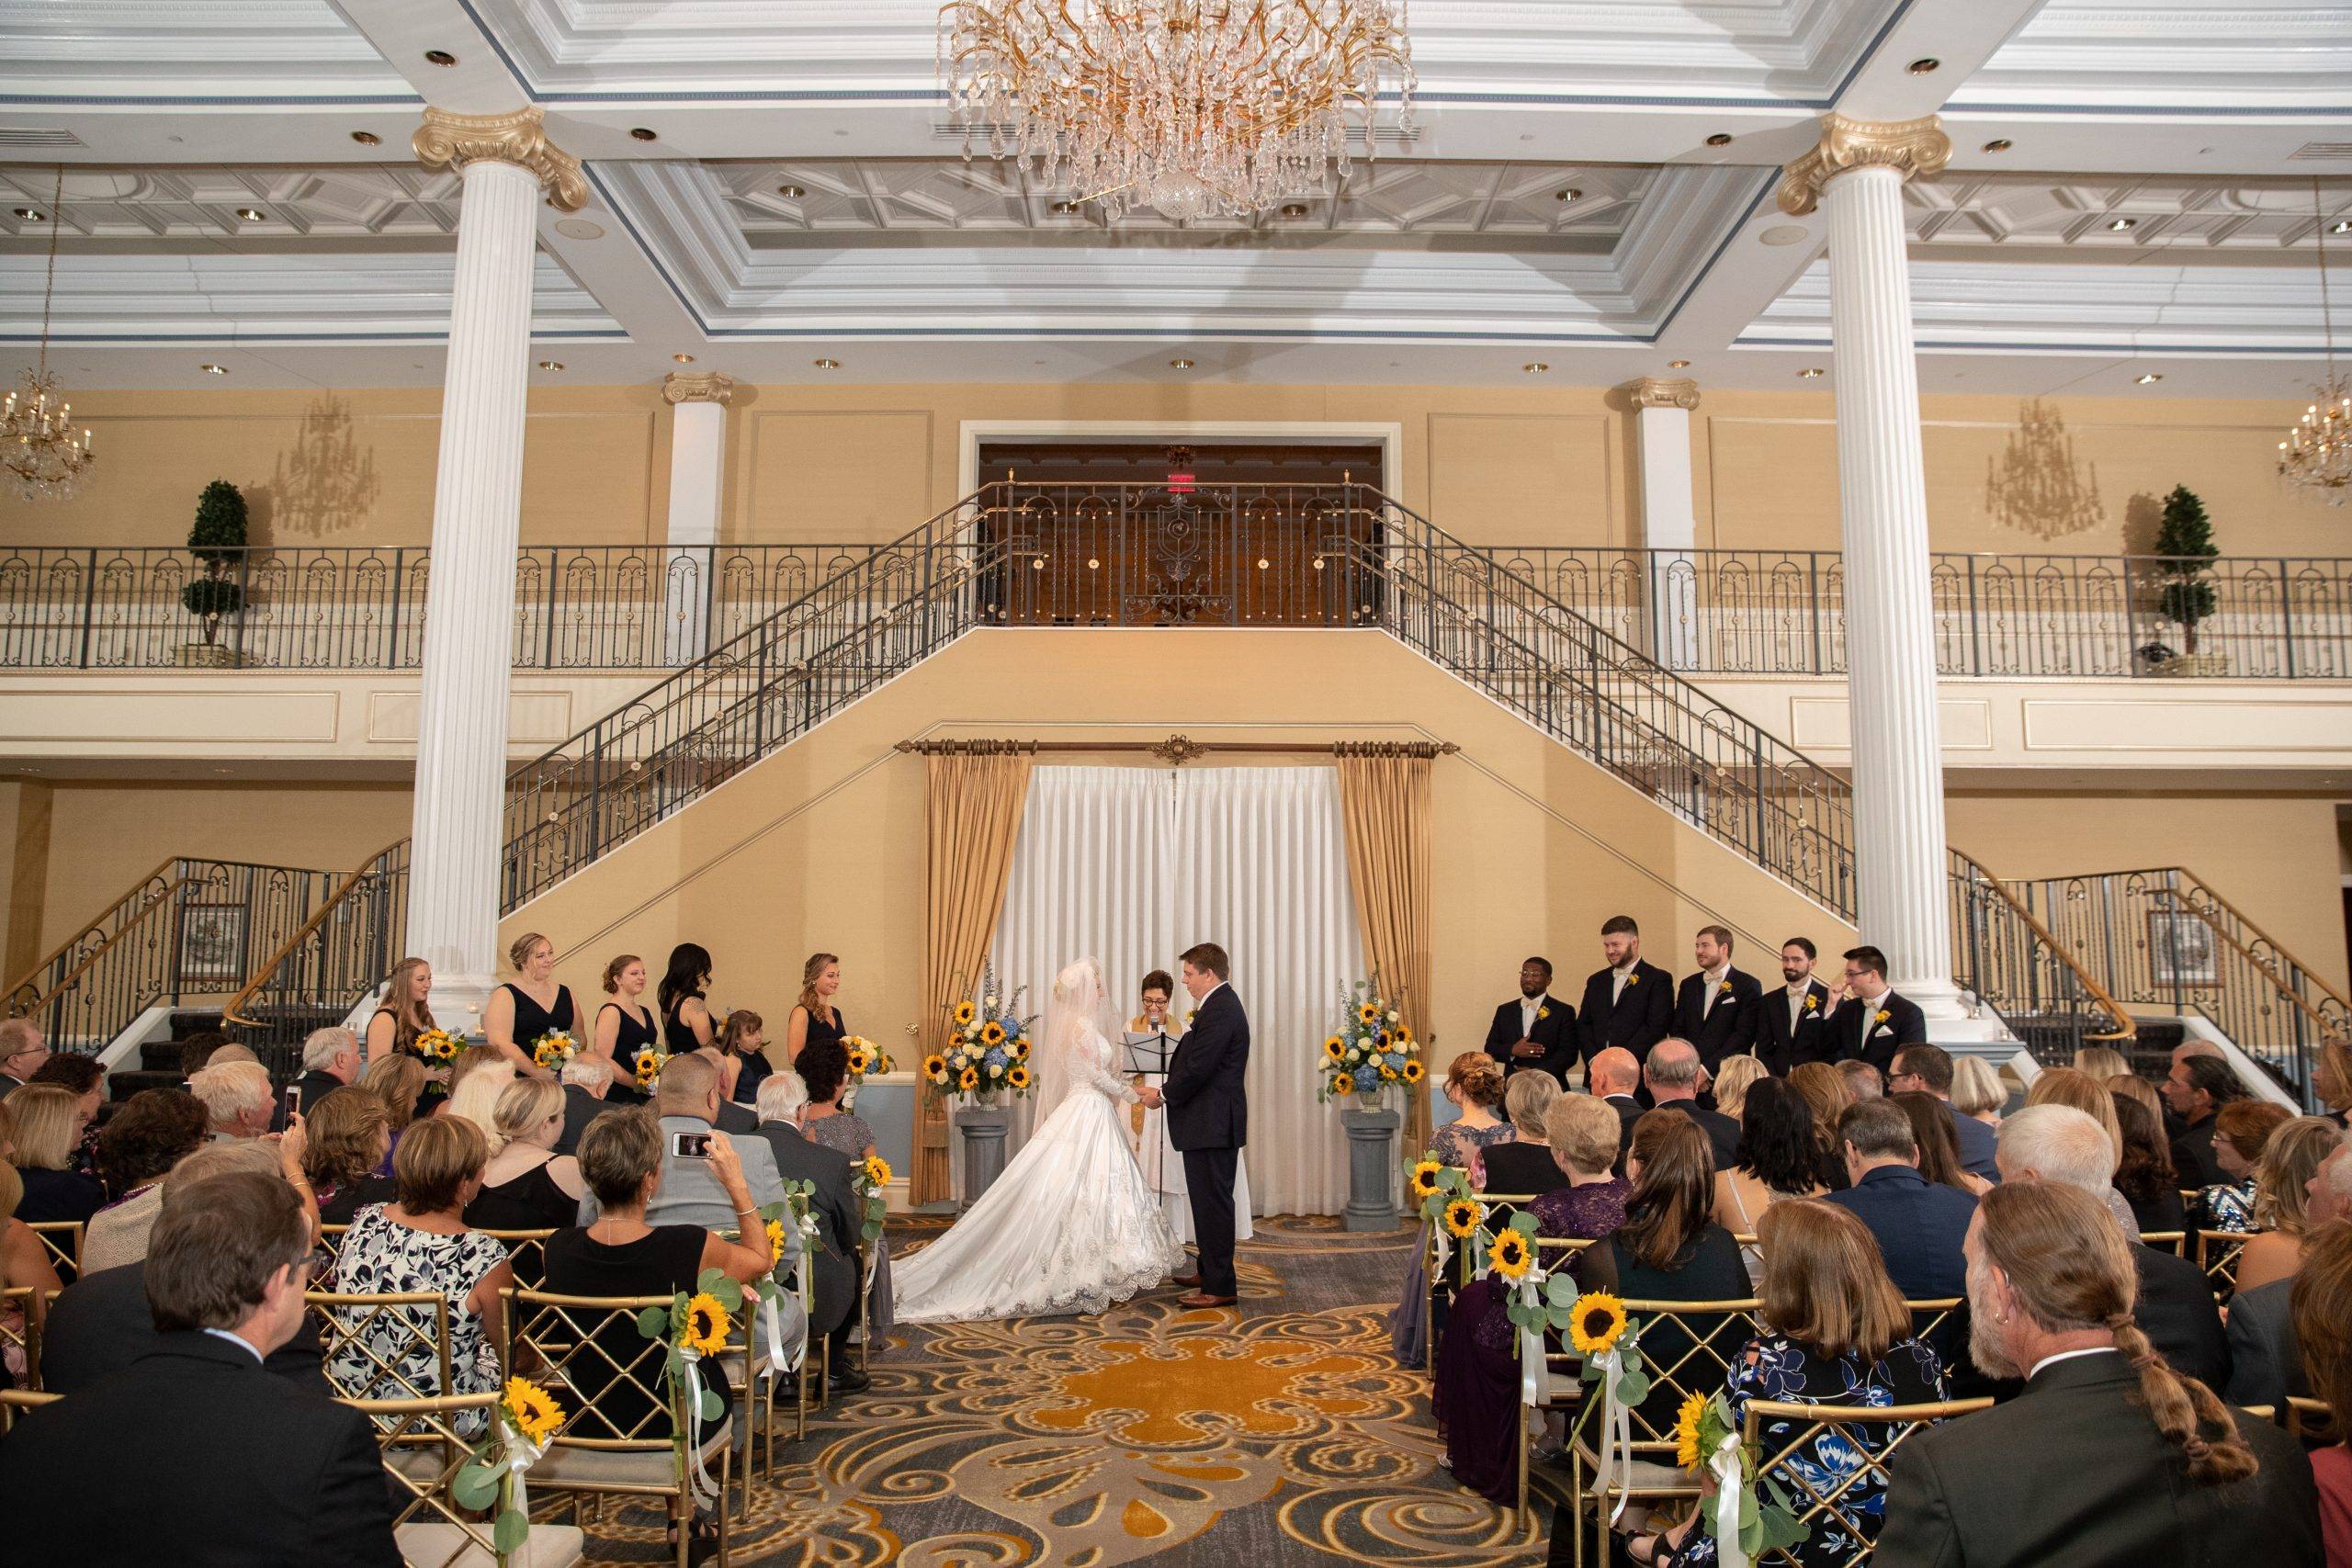 A wedding ceremony in the ballroom of a hotel.